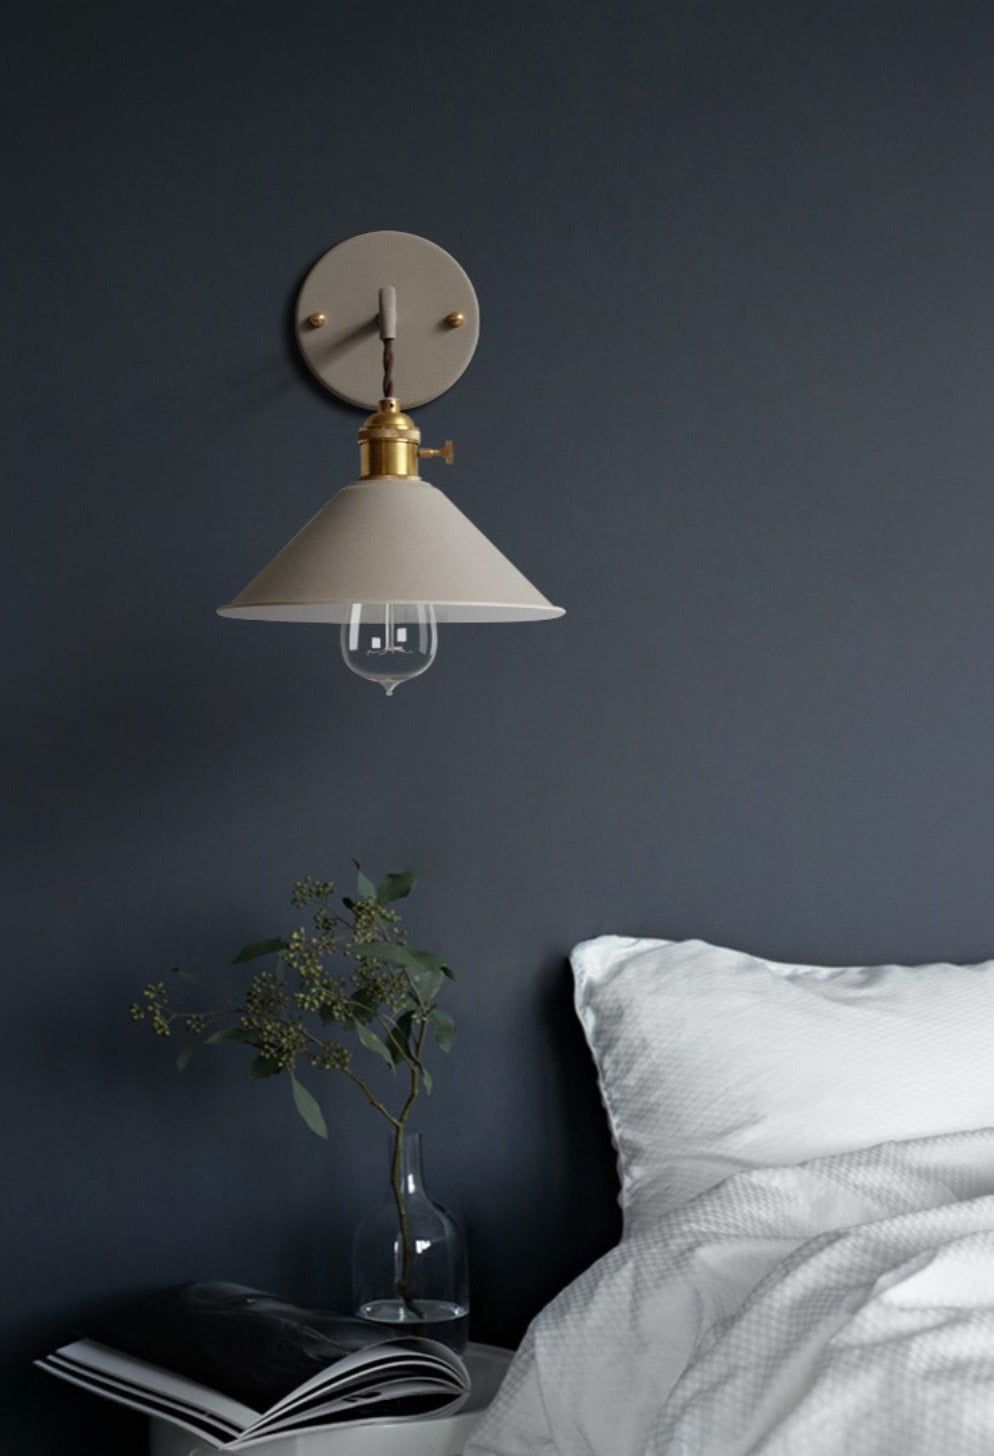 Illuminating Your Bedroom with Wall Mounted Lights